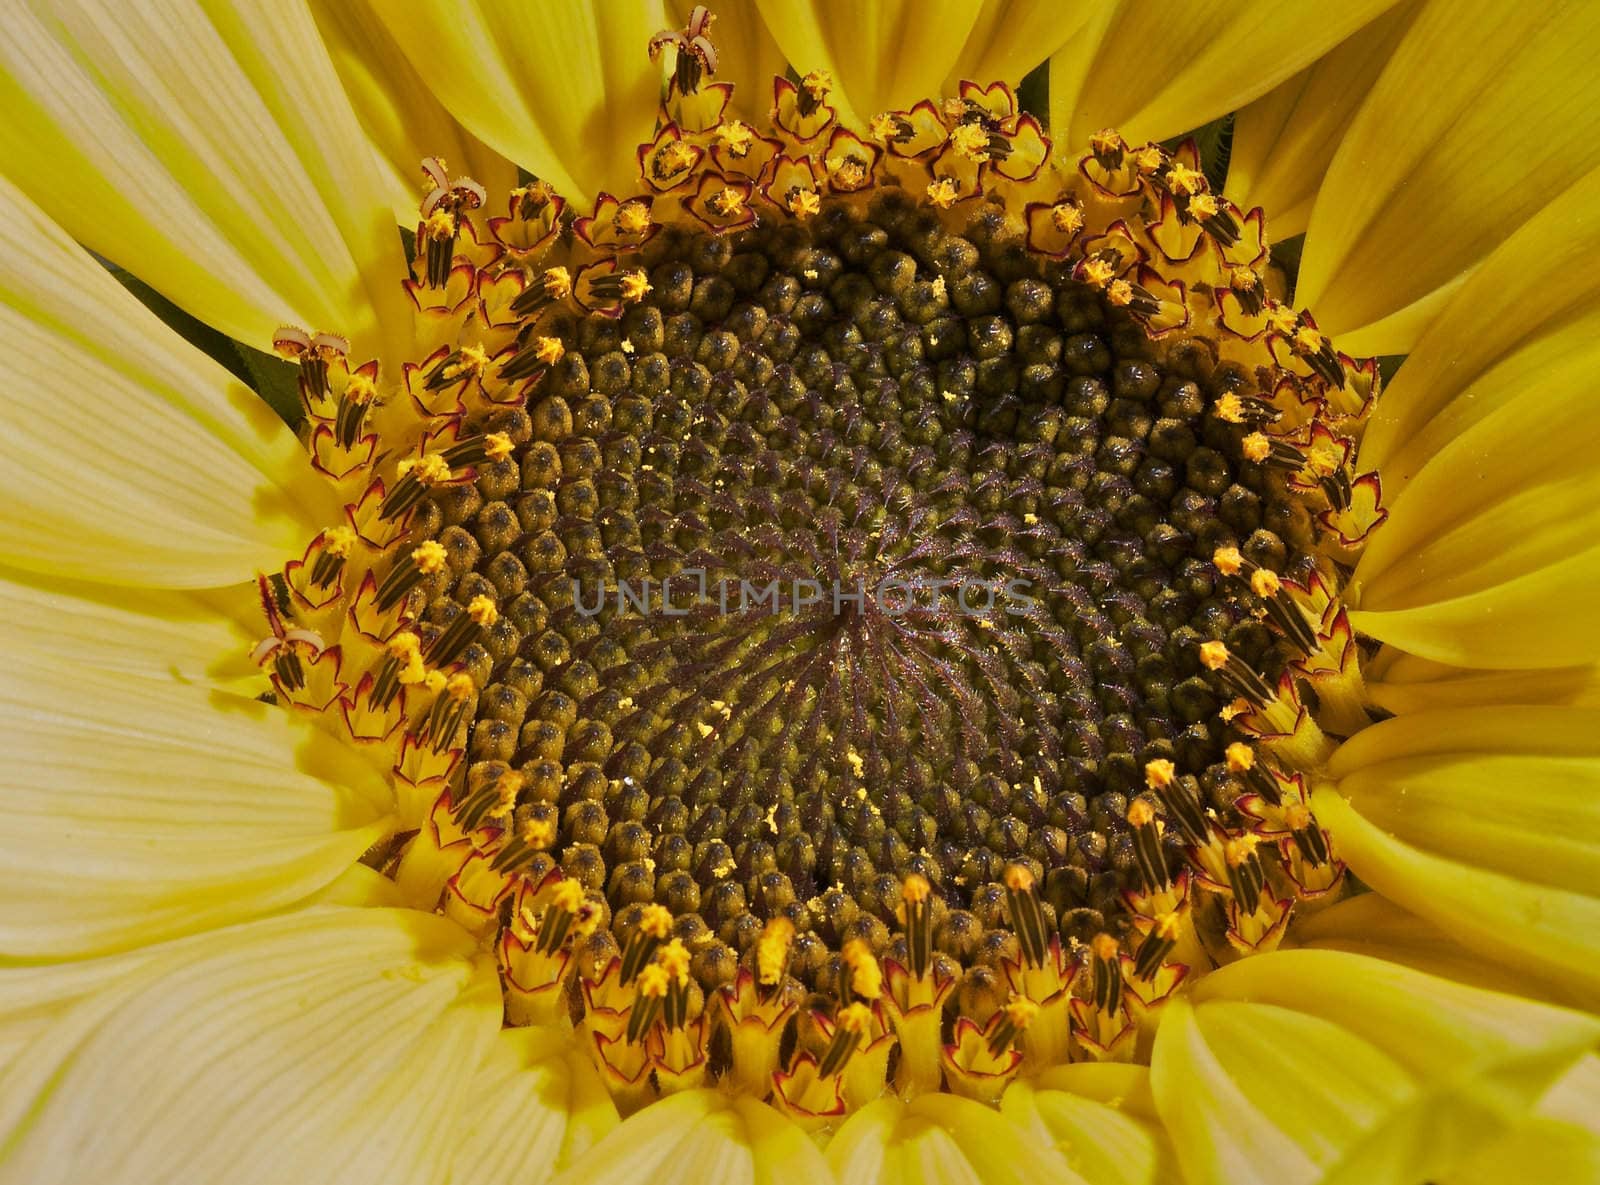 Macro of the center of a yellow sunflower